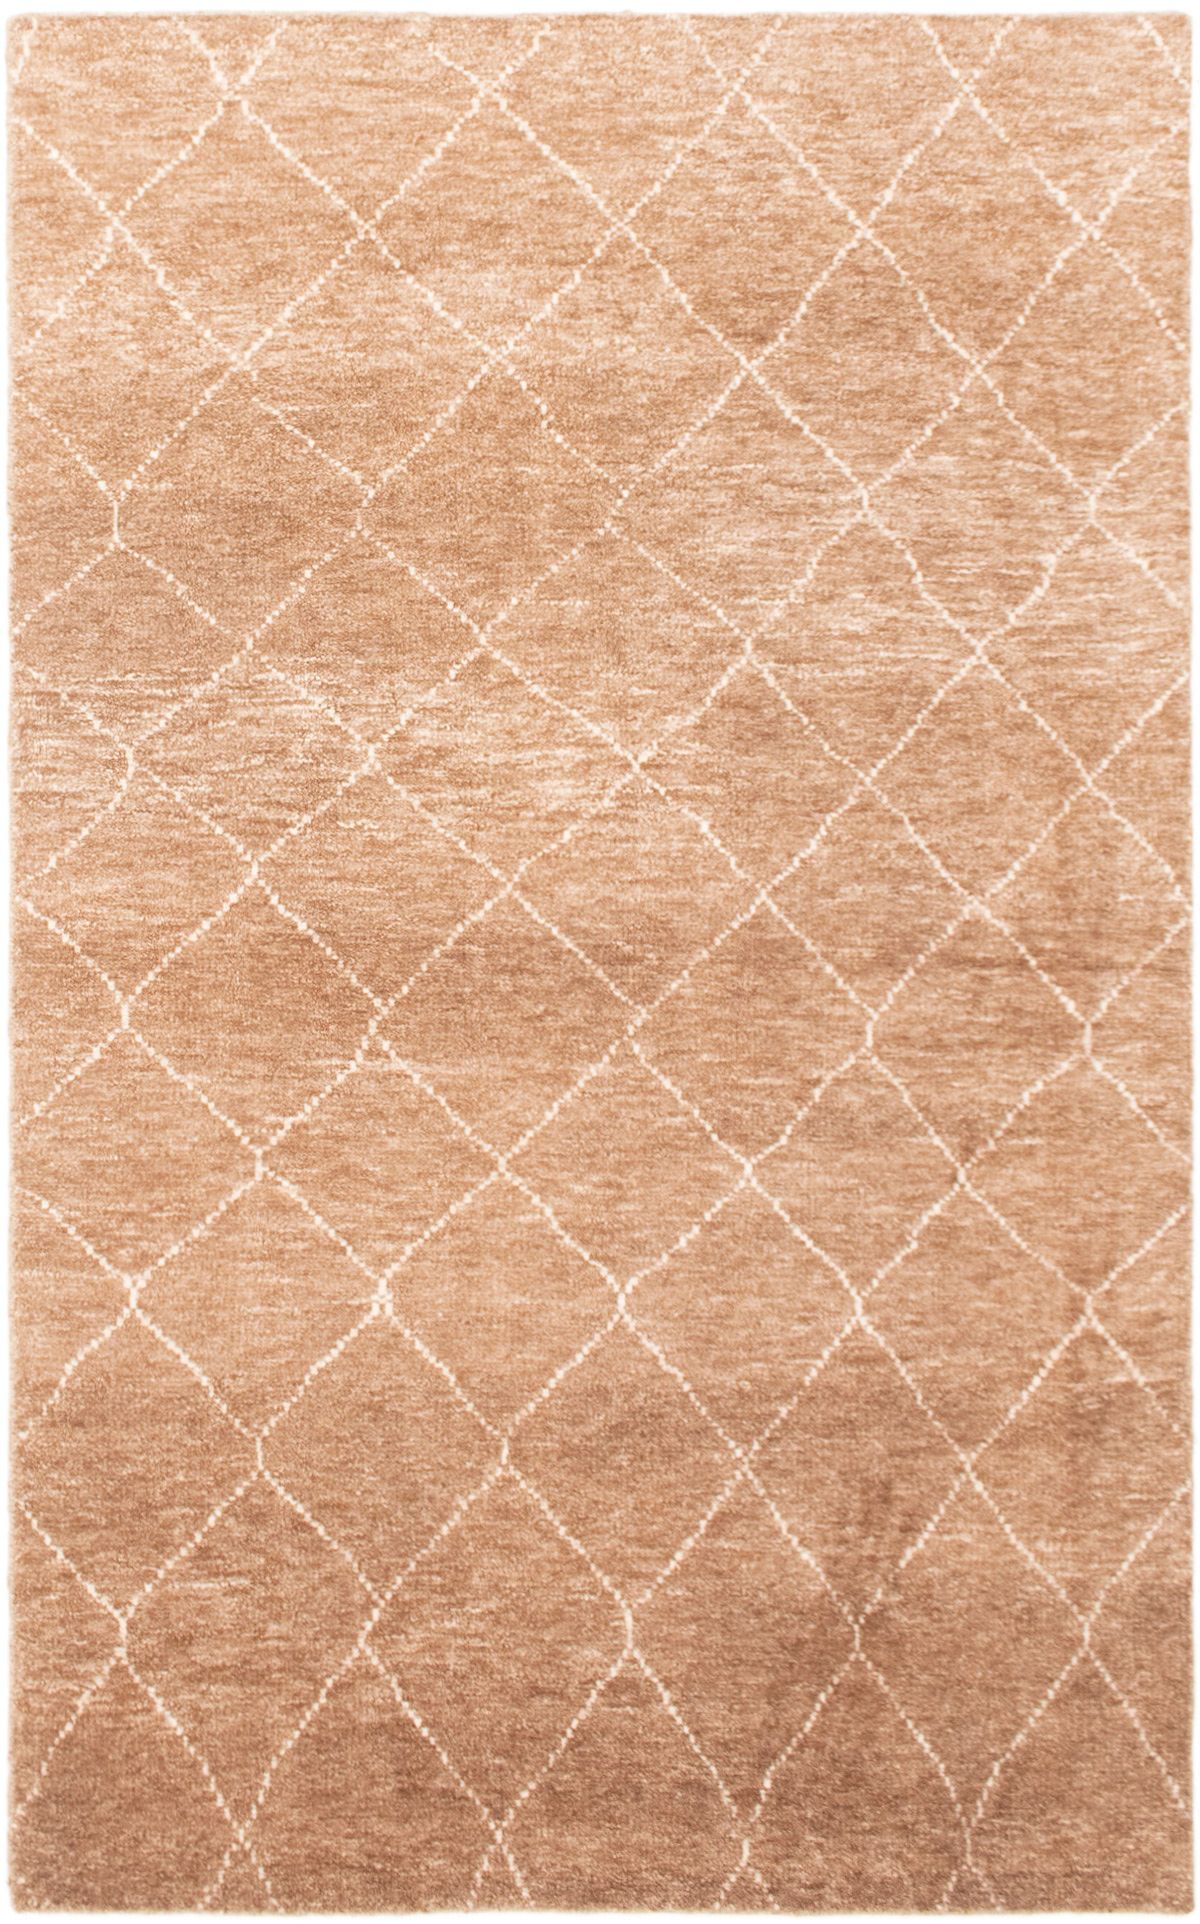 Hand-knotted Tangier Tan Wool Rug 4'11" x 7'11" Size: 4'11" x 7'11"  